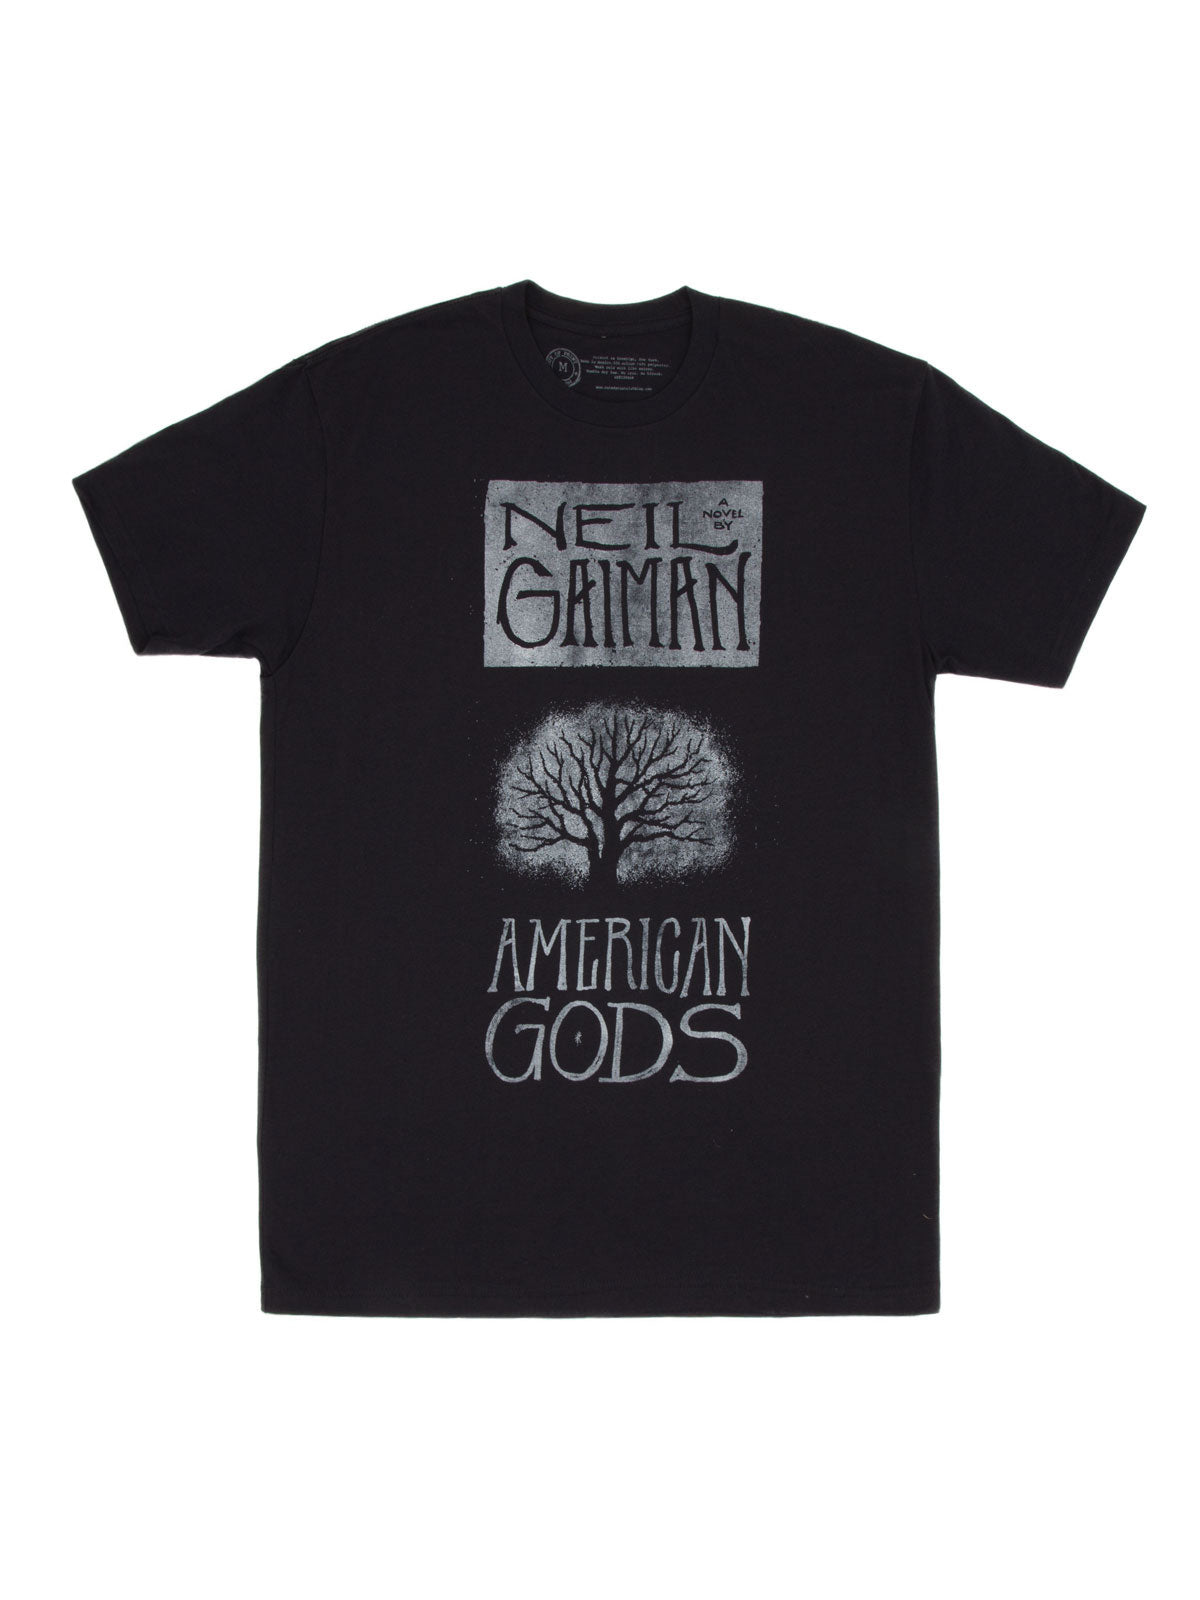 American Gods By Neil Gaiman Book T-Shirt Collection